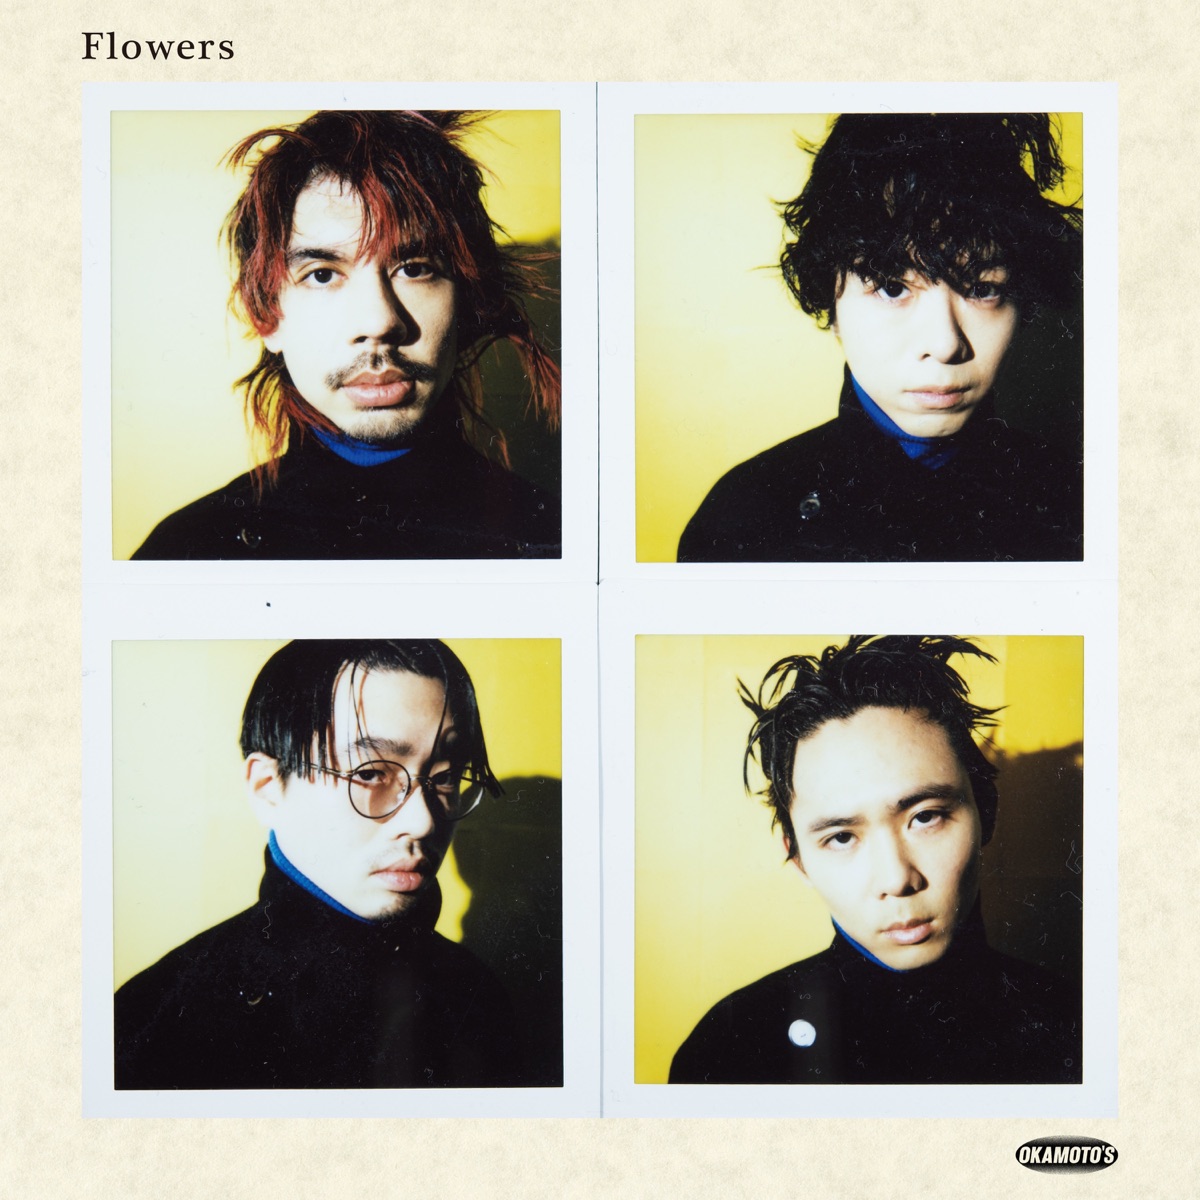 Cover art for『OKAMOTO'S - Flowers』from the release『Flowers